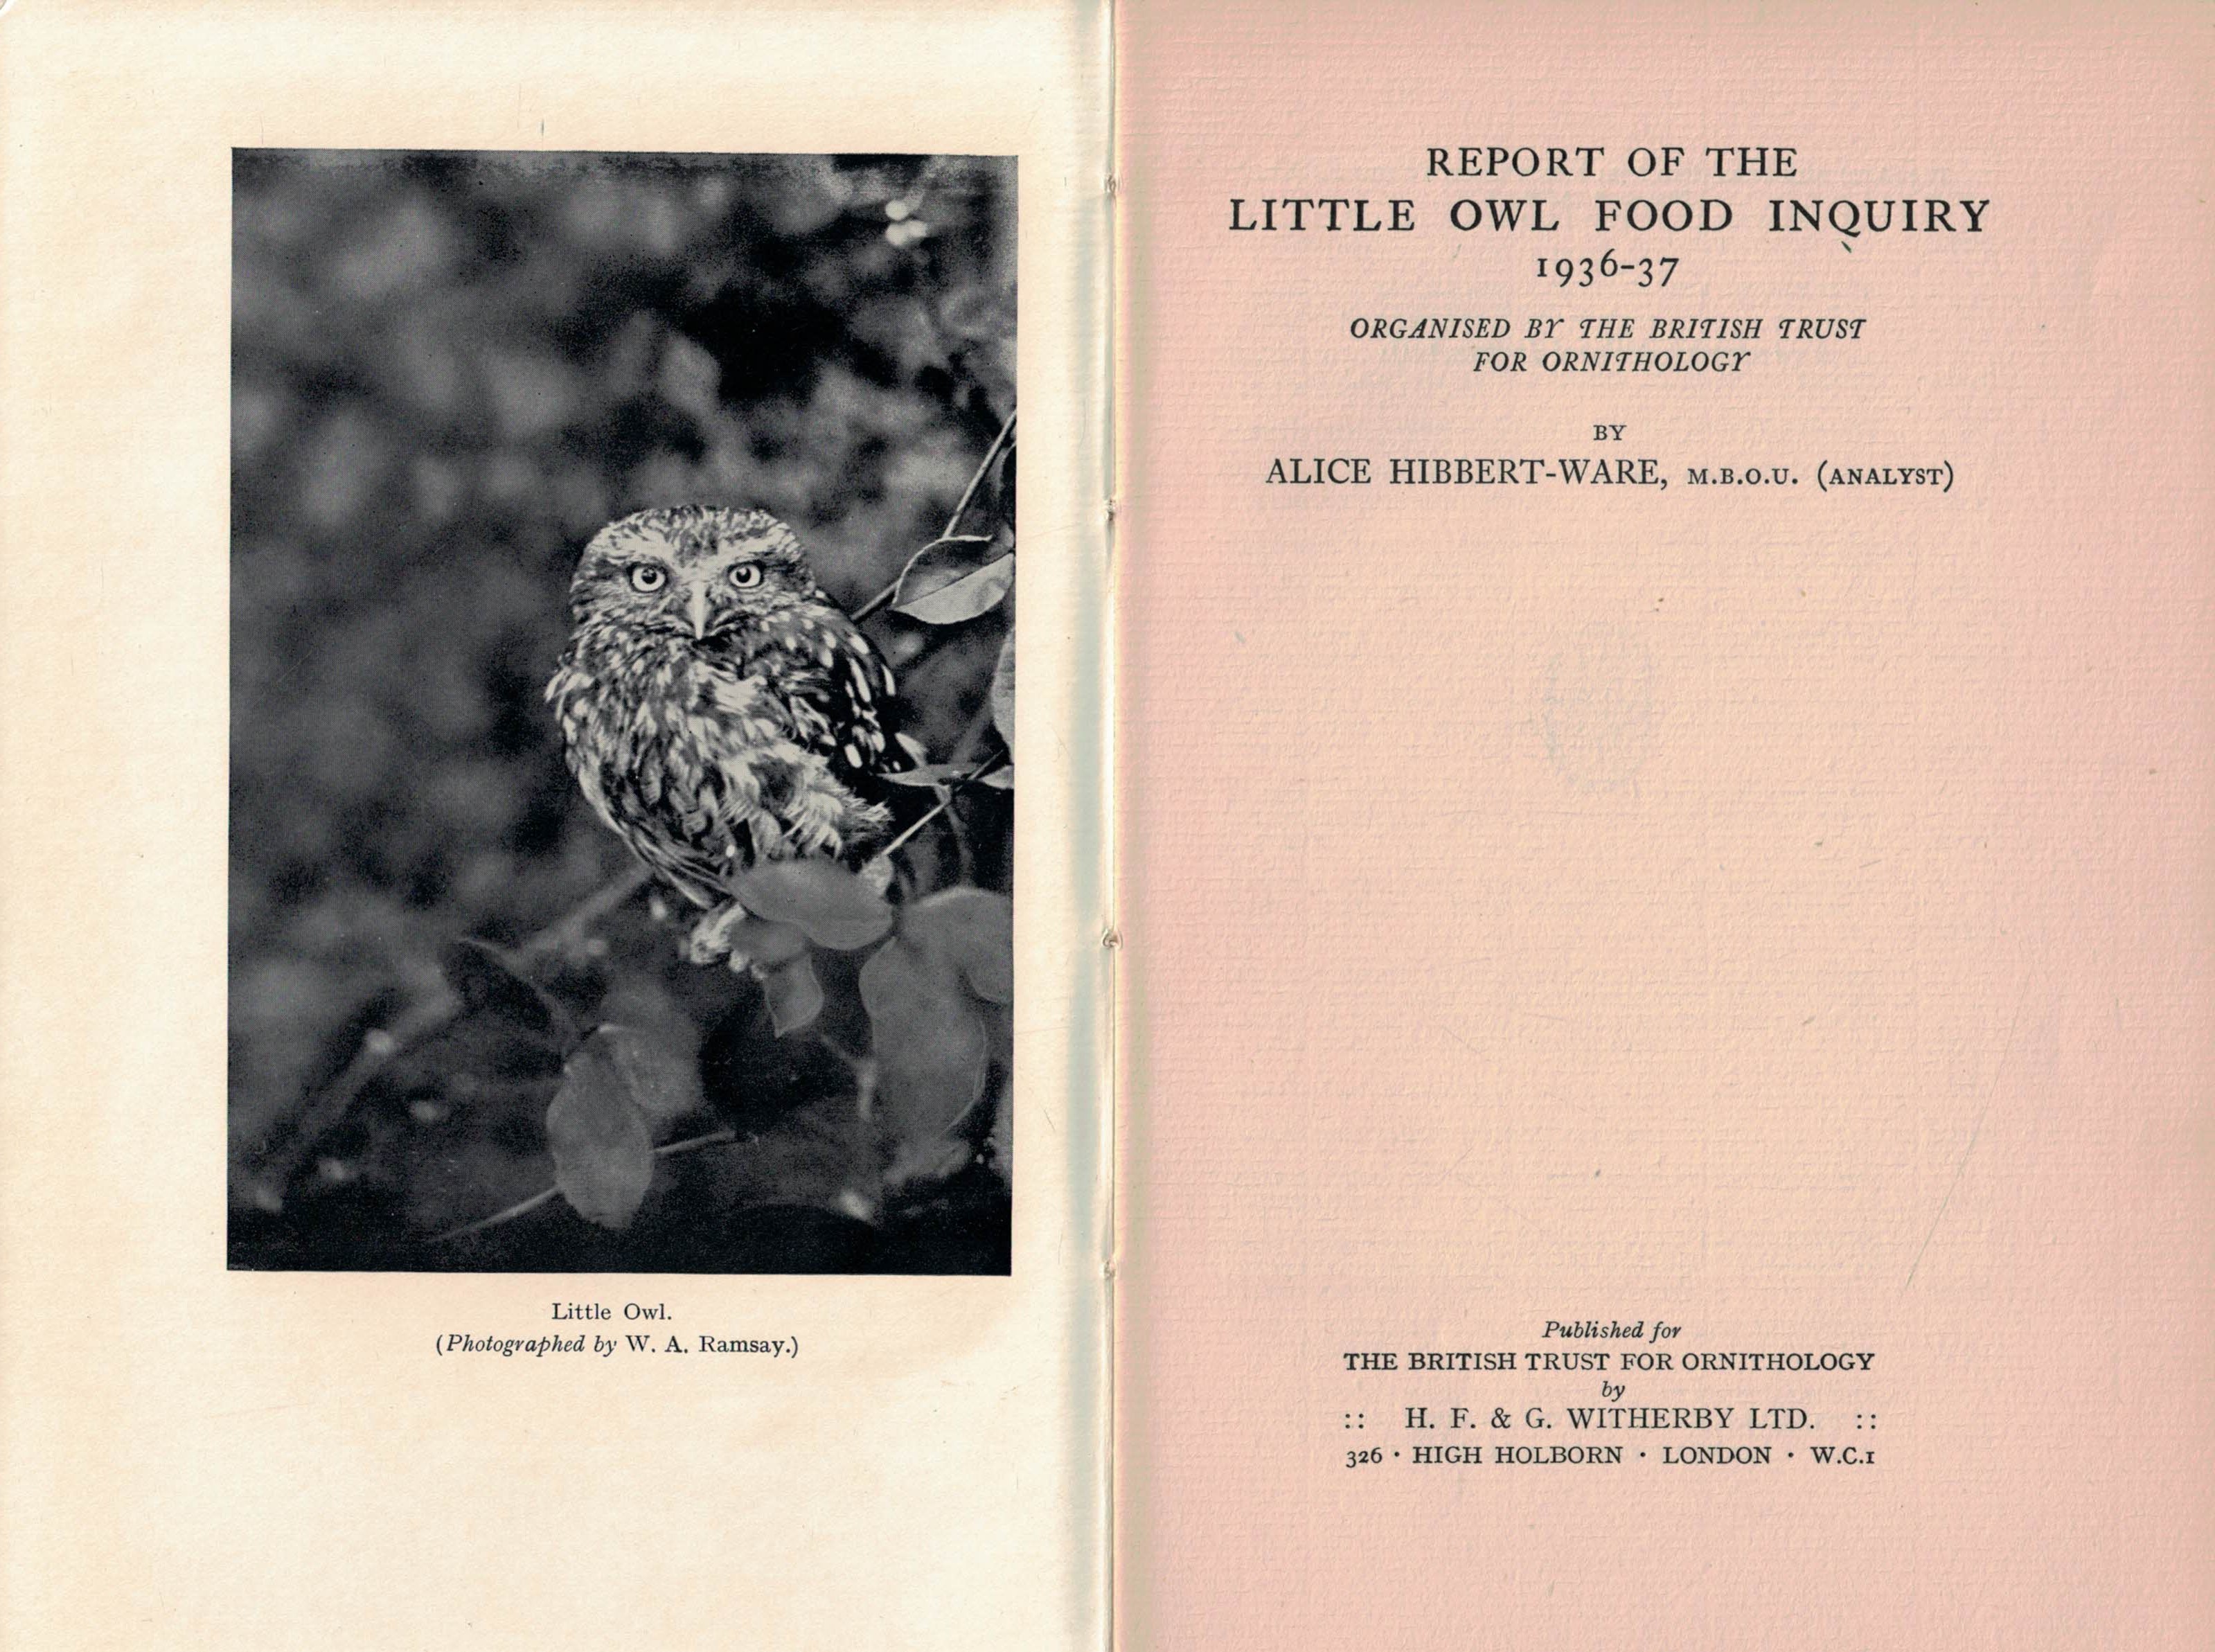 Report of the Little Owl Food Inquiry 1936-37. Organised by The British Trust for Ornithology.